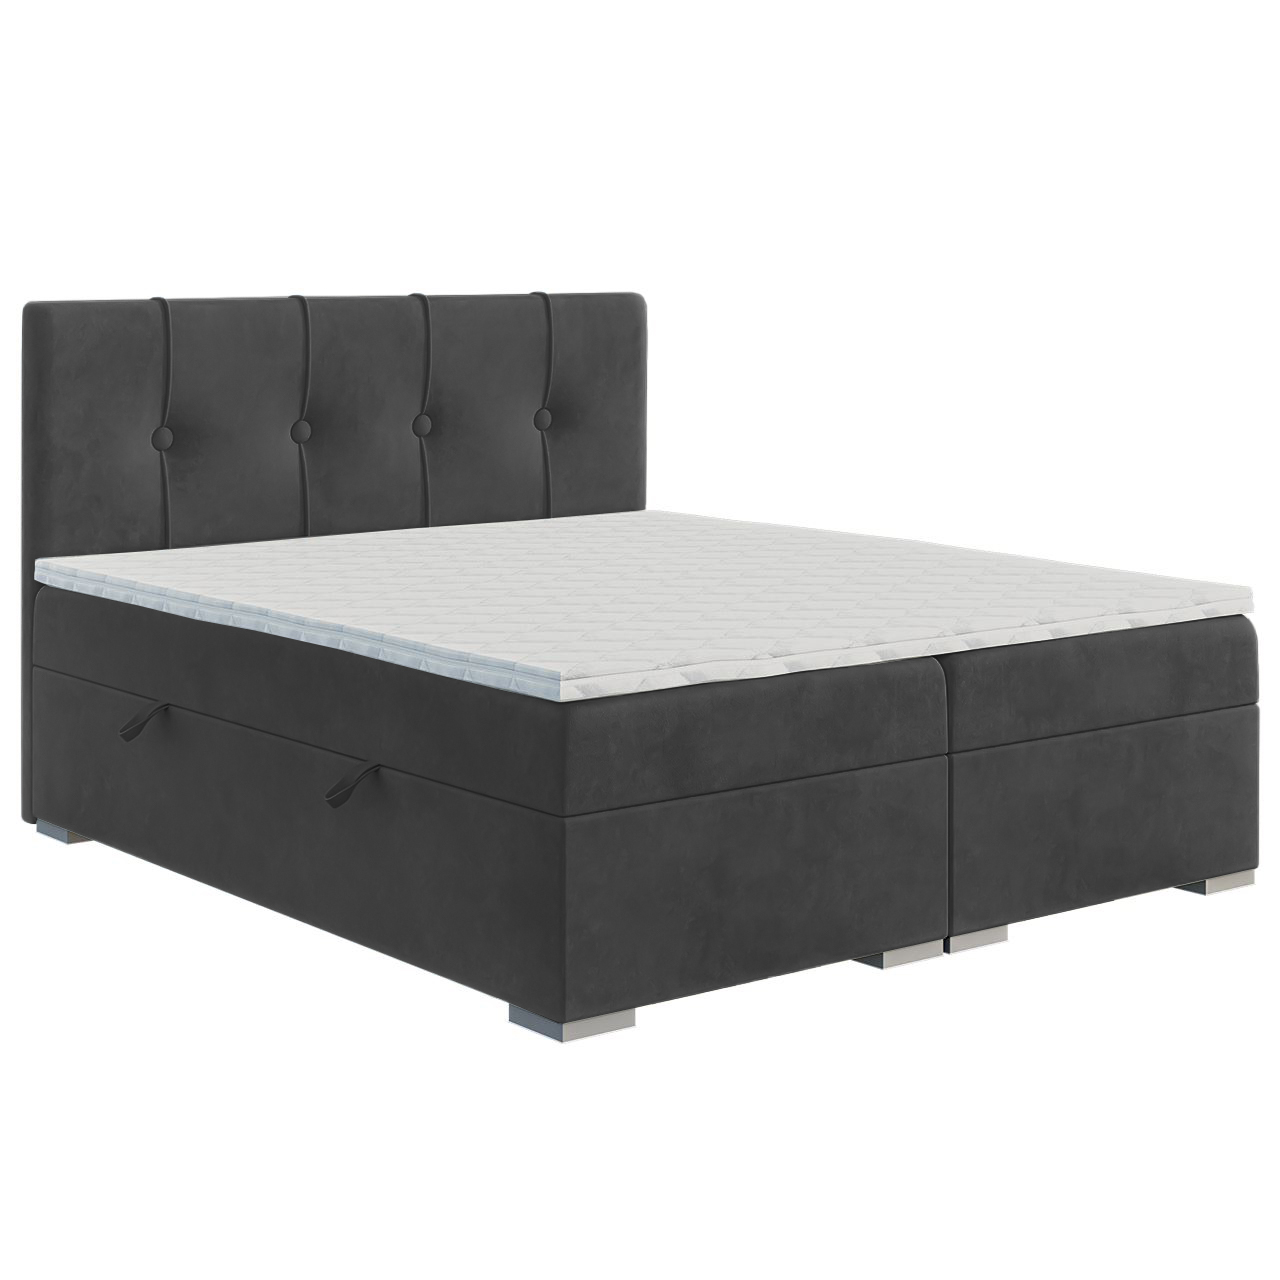 Upholstered bed RULEZ 180x200 riviera 97